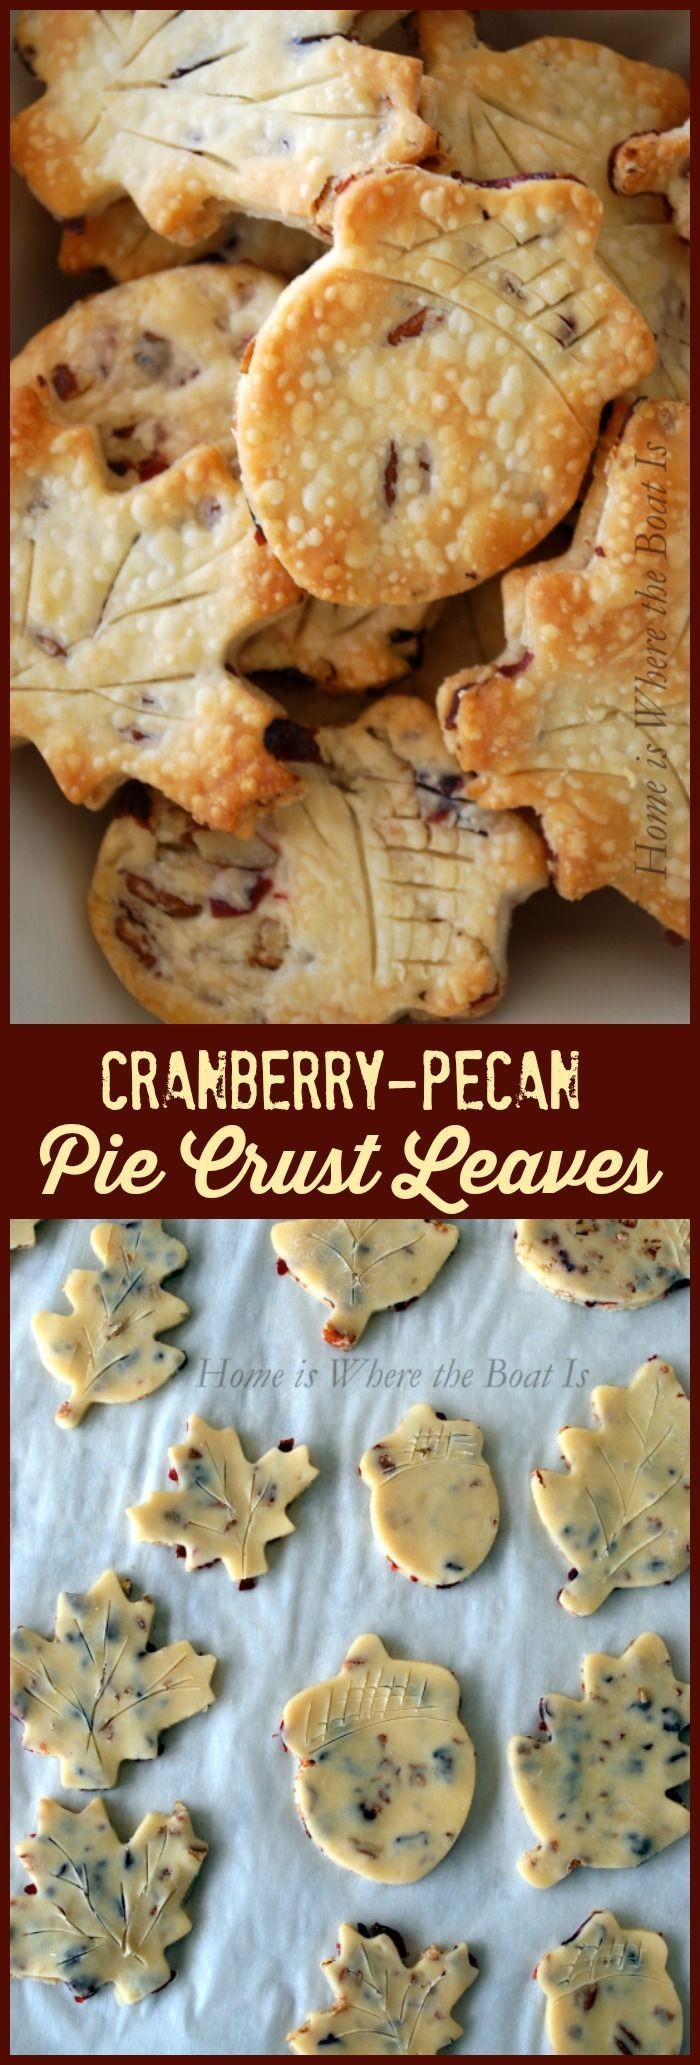 Cranberry-Pecan Pie Crust Leaves Dress up your lef...